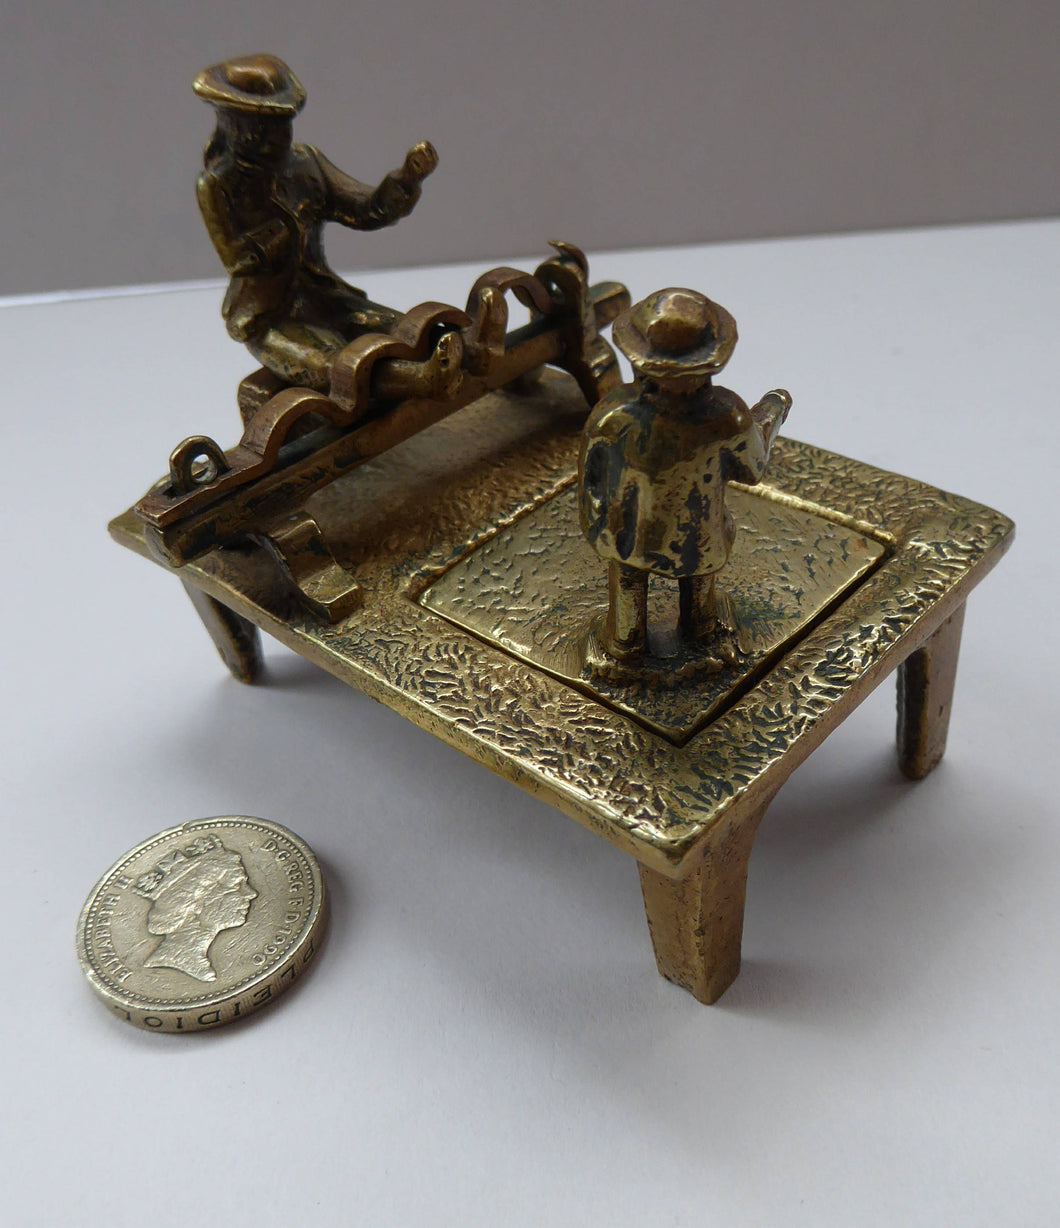 ANTIQUE INKWELL. An Extremely Rare Miniature Example Featuring a Little Man in Village Stocks Being Pelted with Fruit